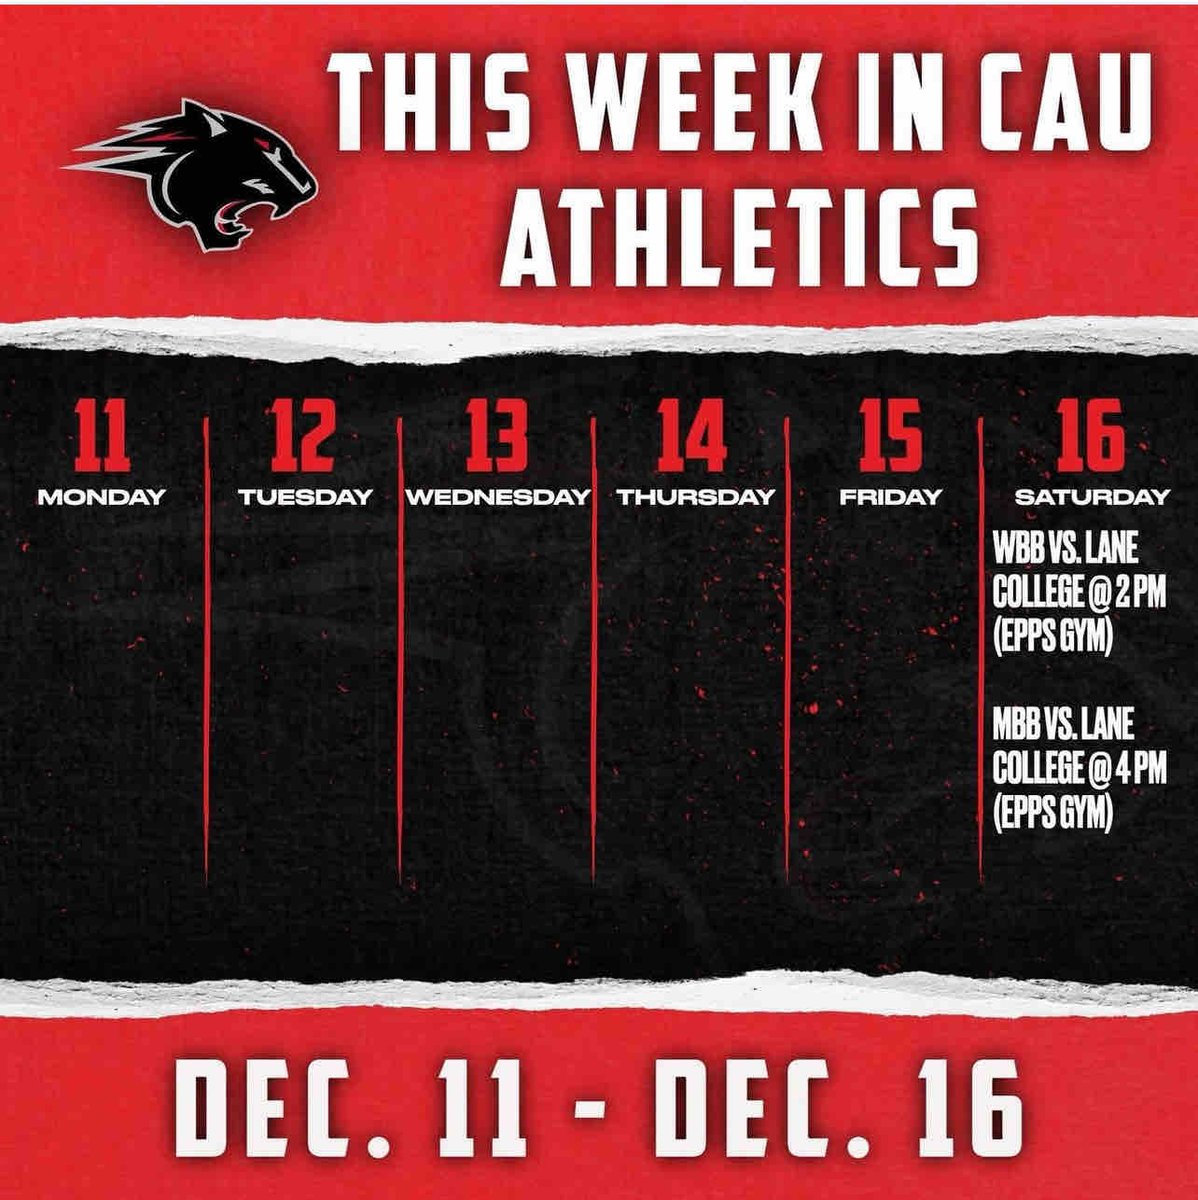 This Week in CAU Athletics! Women’s basketball returns home to face Lane College on Saturday at 2 p.m., followed by Men’s basketball at 4 p.m. Come out and support your CAU Panthers!